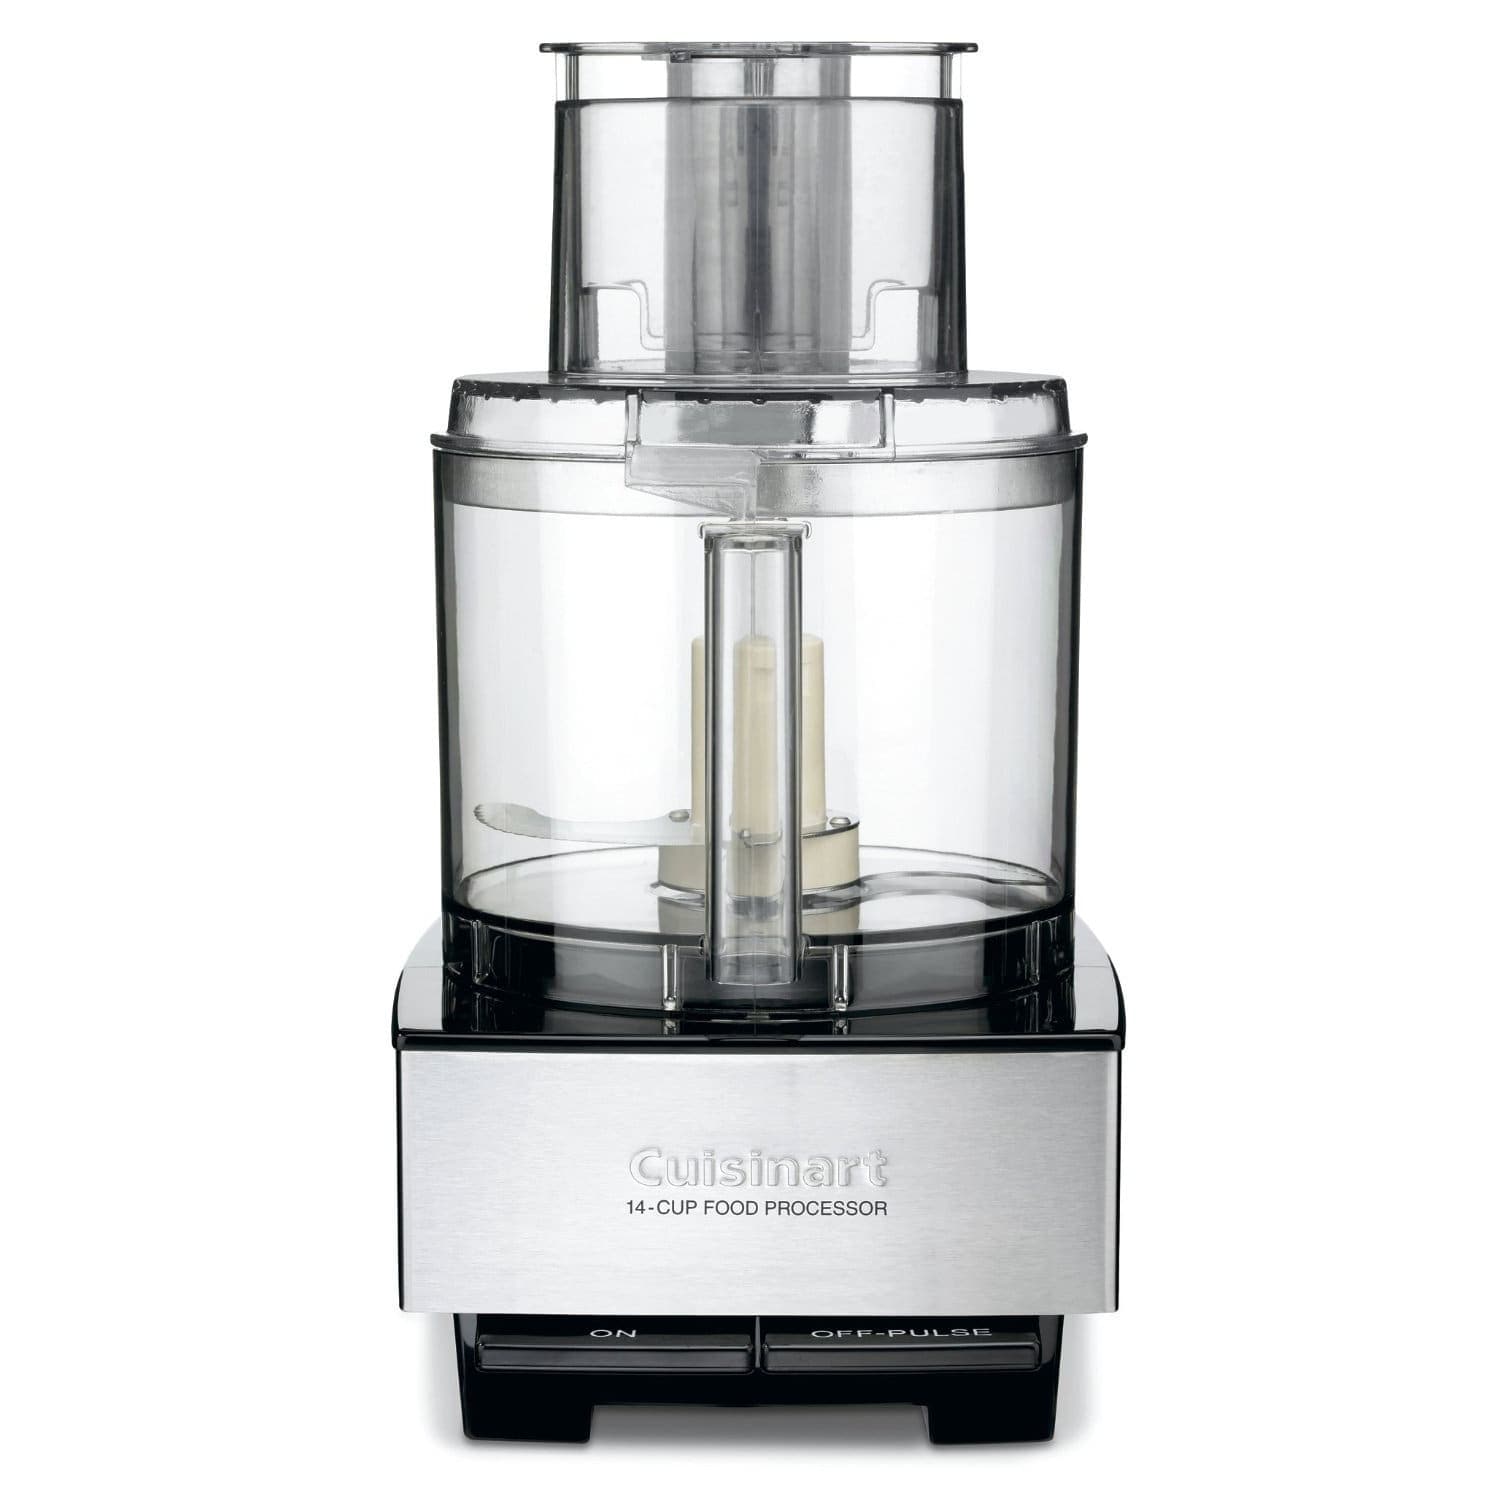 Cuisinart 8 Cup Food Processor Model: DLC-6 for Sale in Seattle